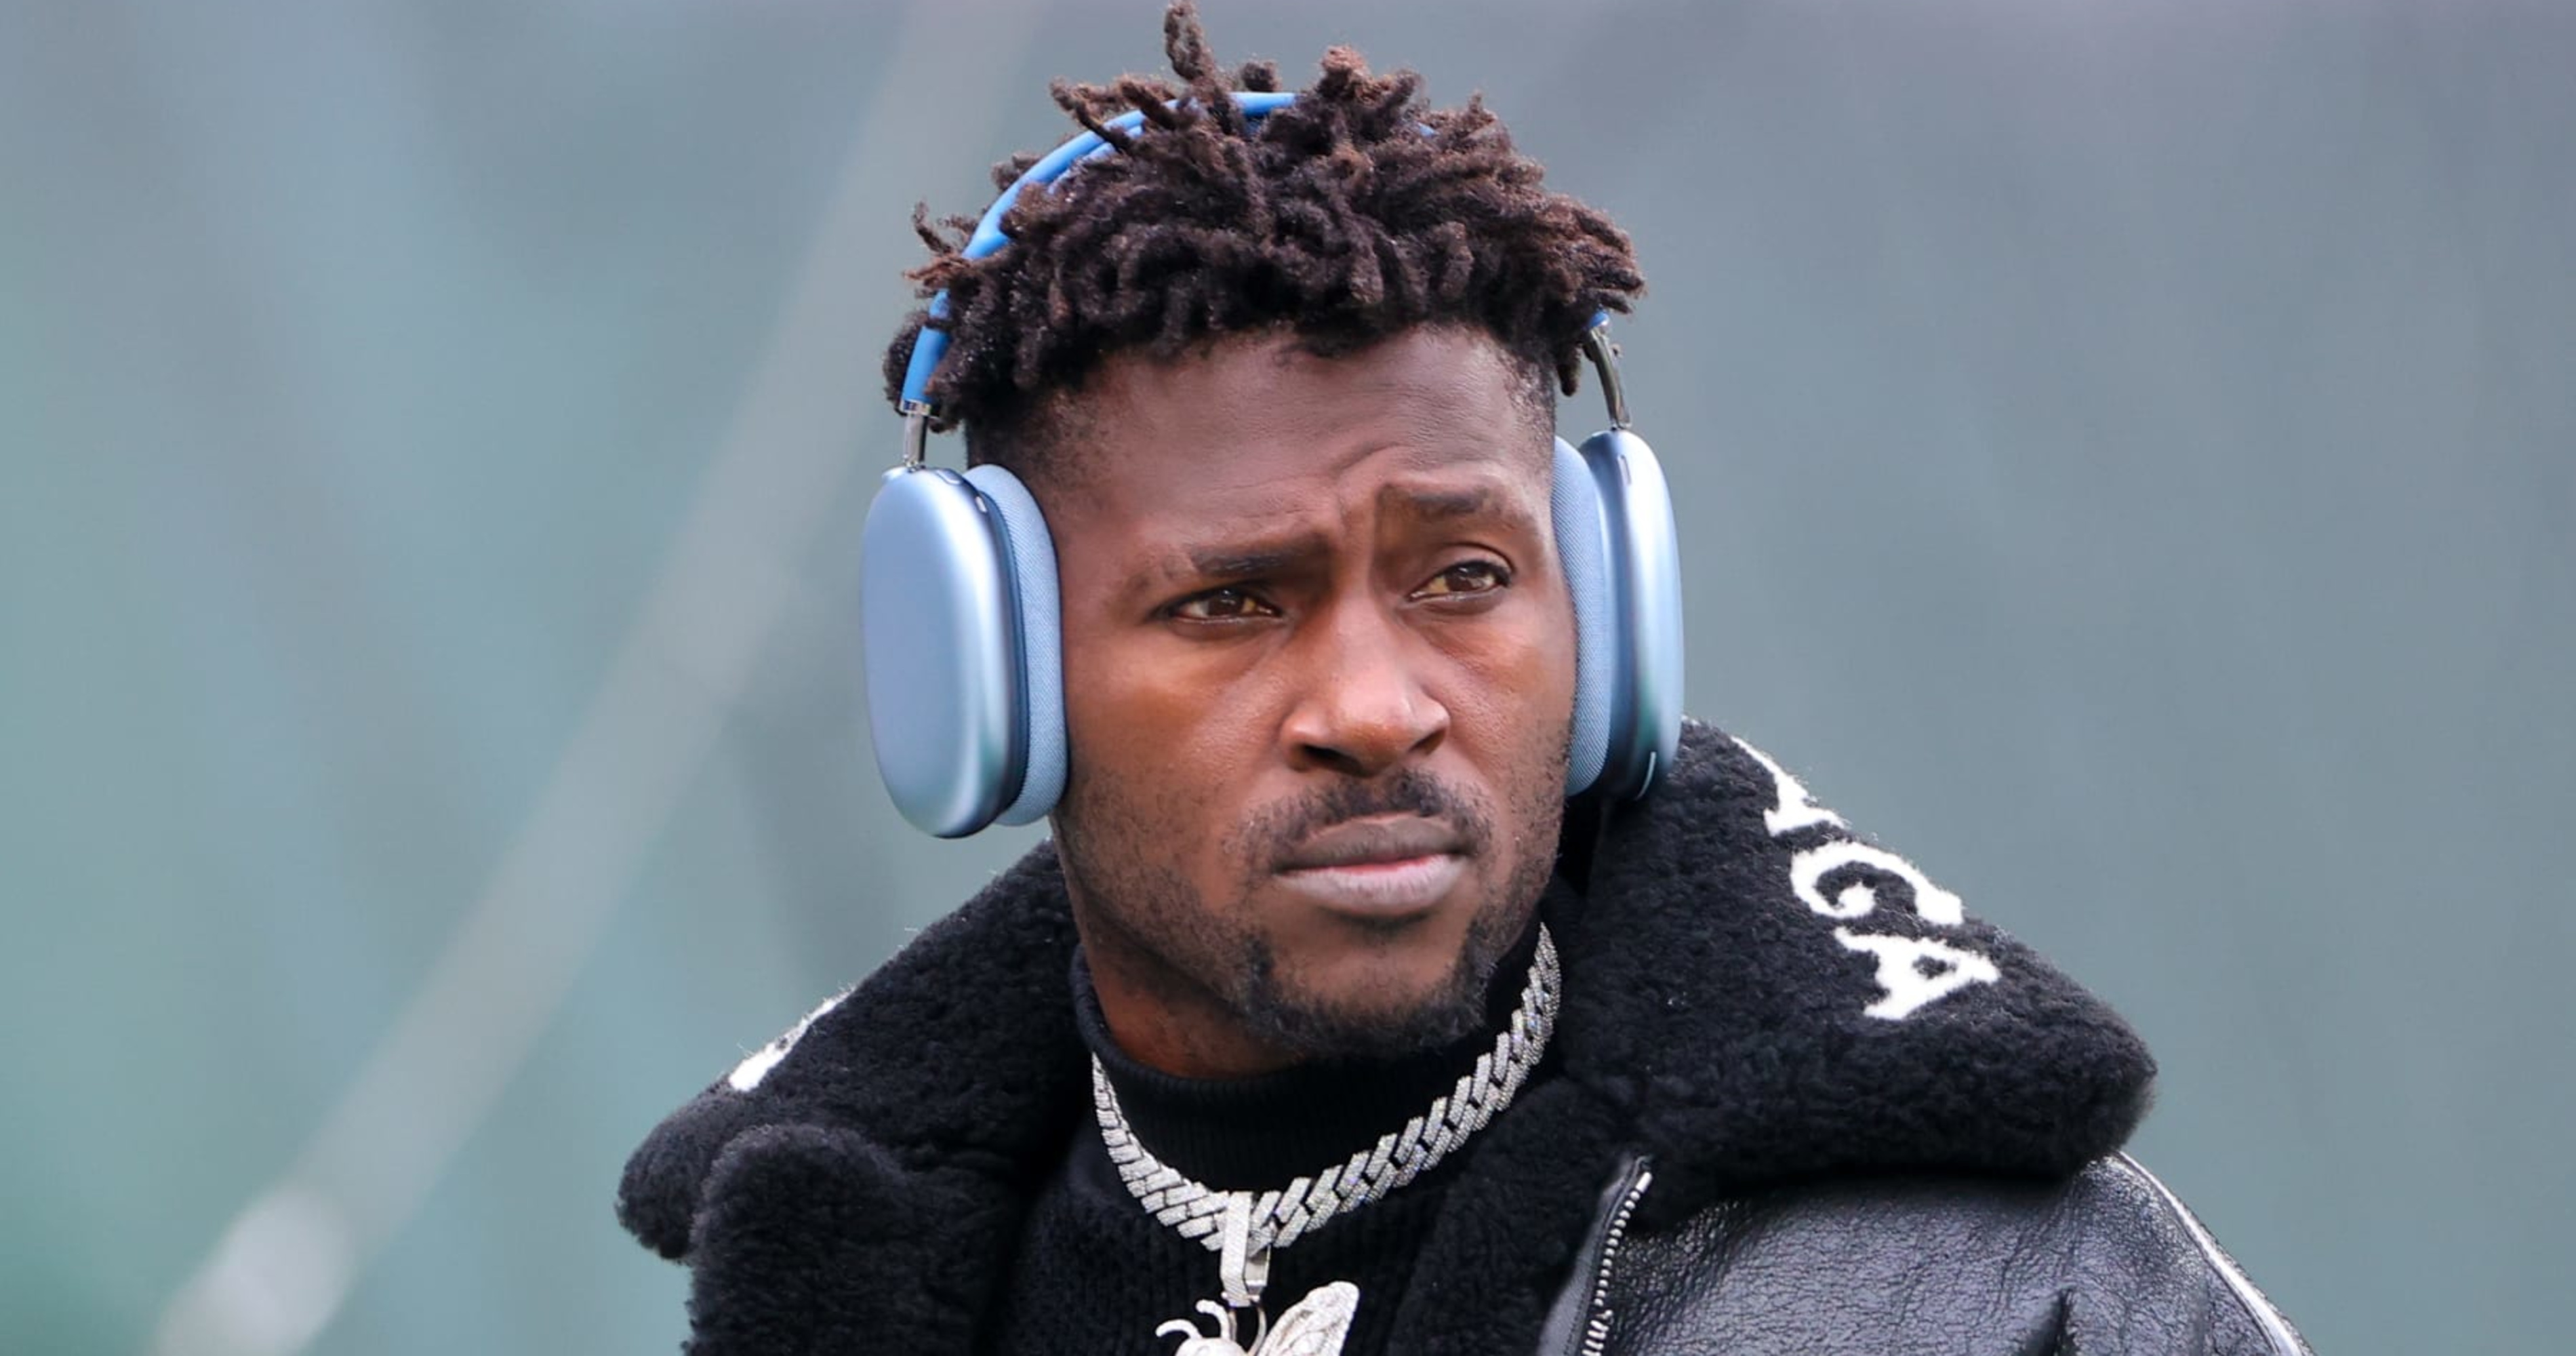 Antonio Brown Exposes Himself to Hotel Guests at Swimming Pool in